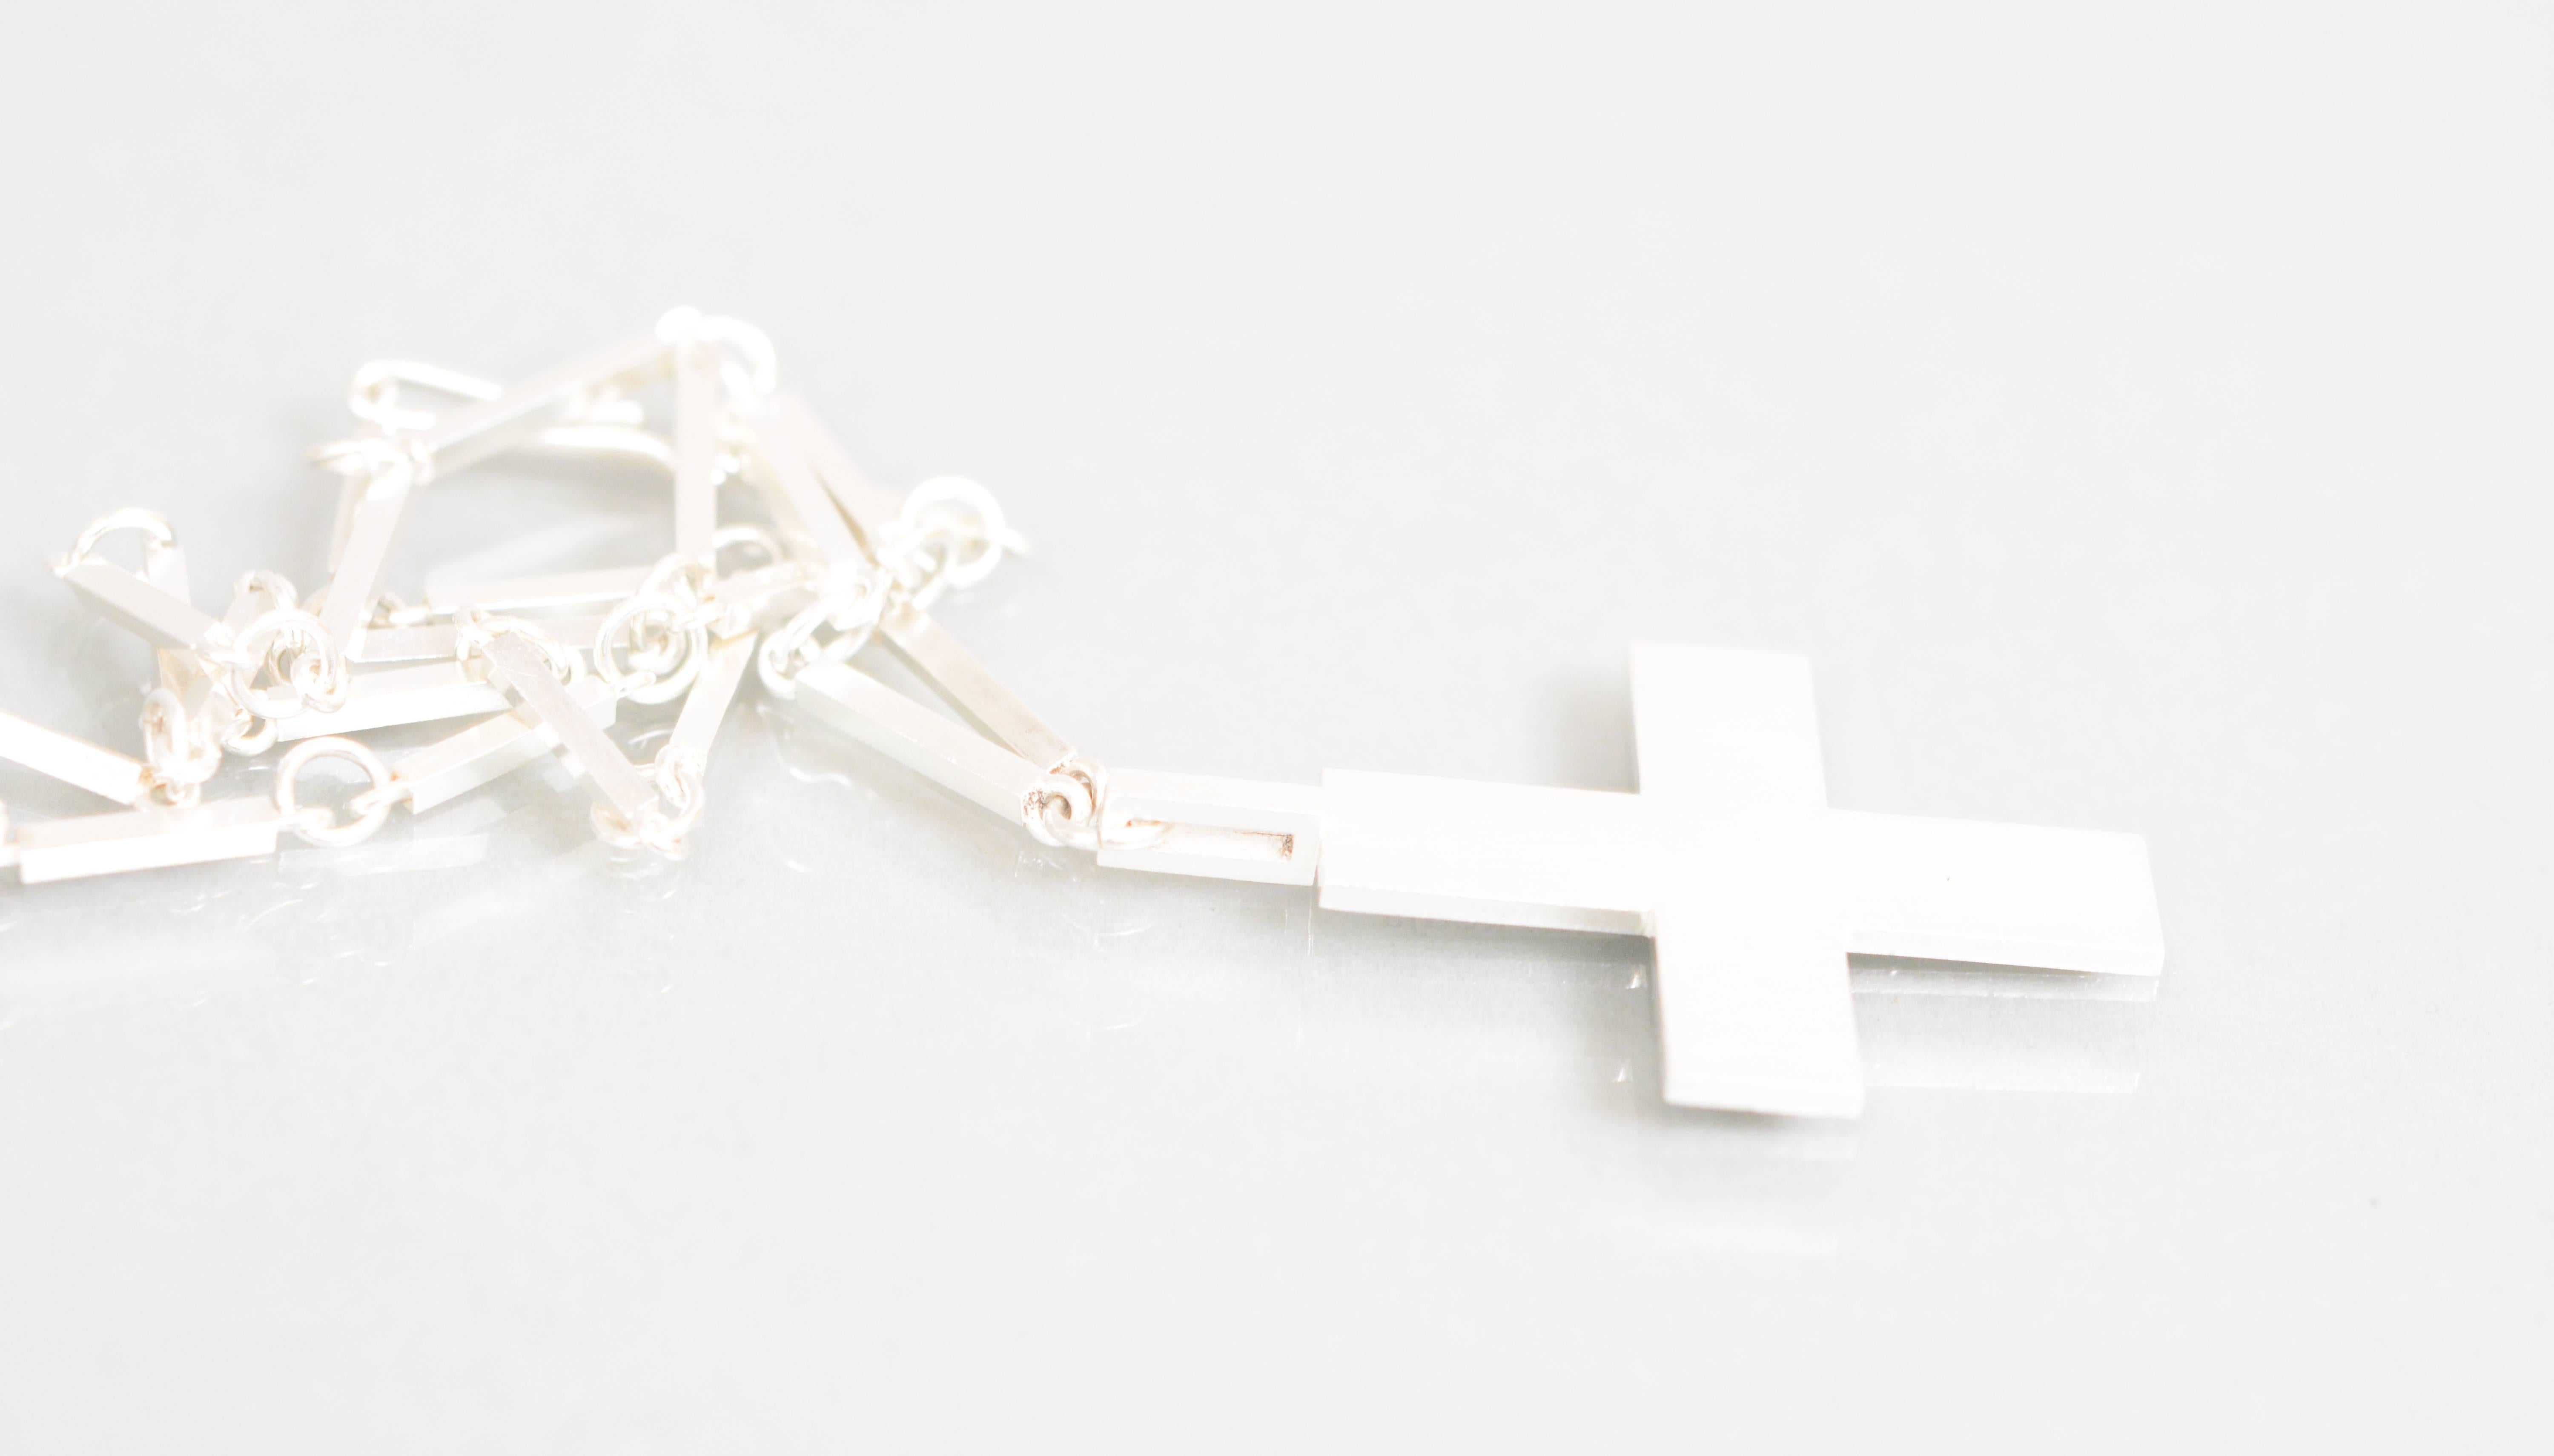 Silver necklace by Wiwen Nilsson, Lund, Sweden. Signed and dated T8 for 1945.

The cross 49 mm high and 33 mm wide.
The chain is 45 cm long.